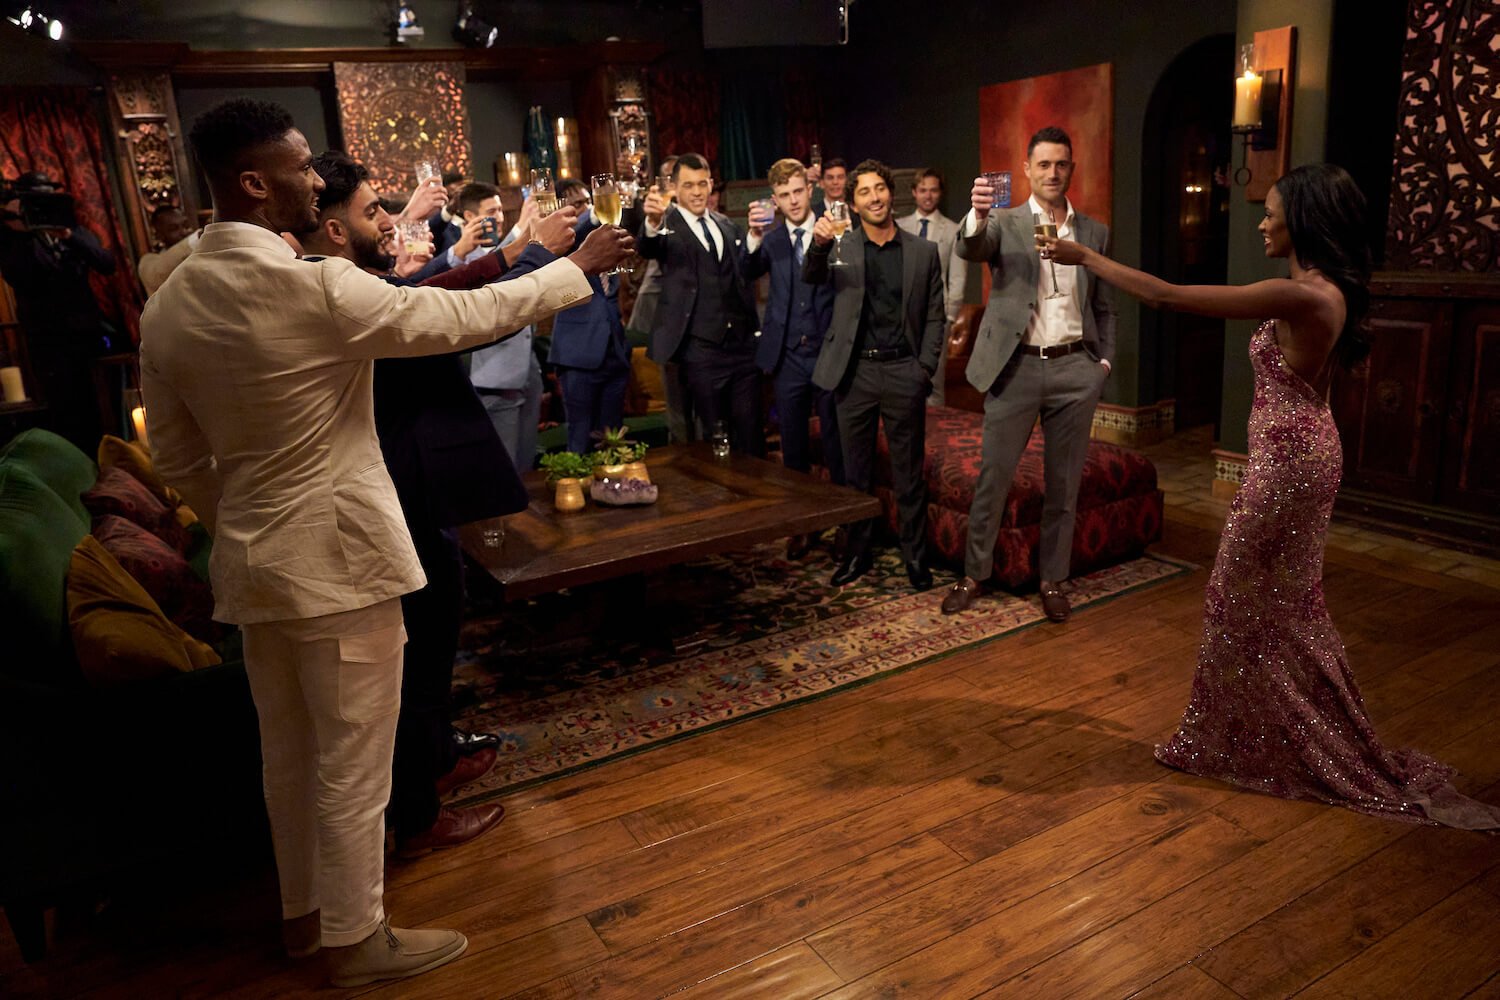 Charity Lawson toasting to the men during 'The Bachelorette' 2023 premiere